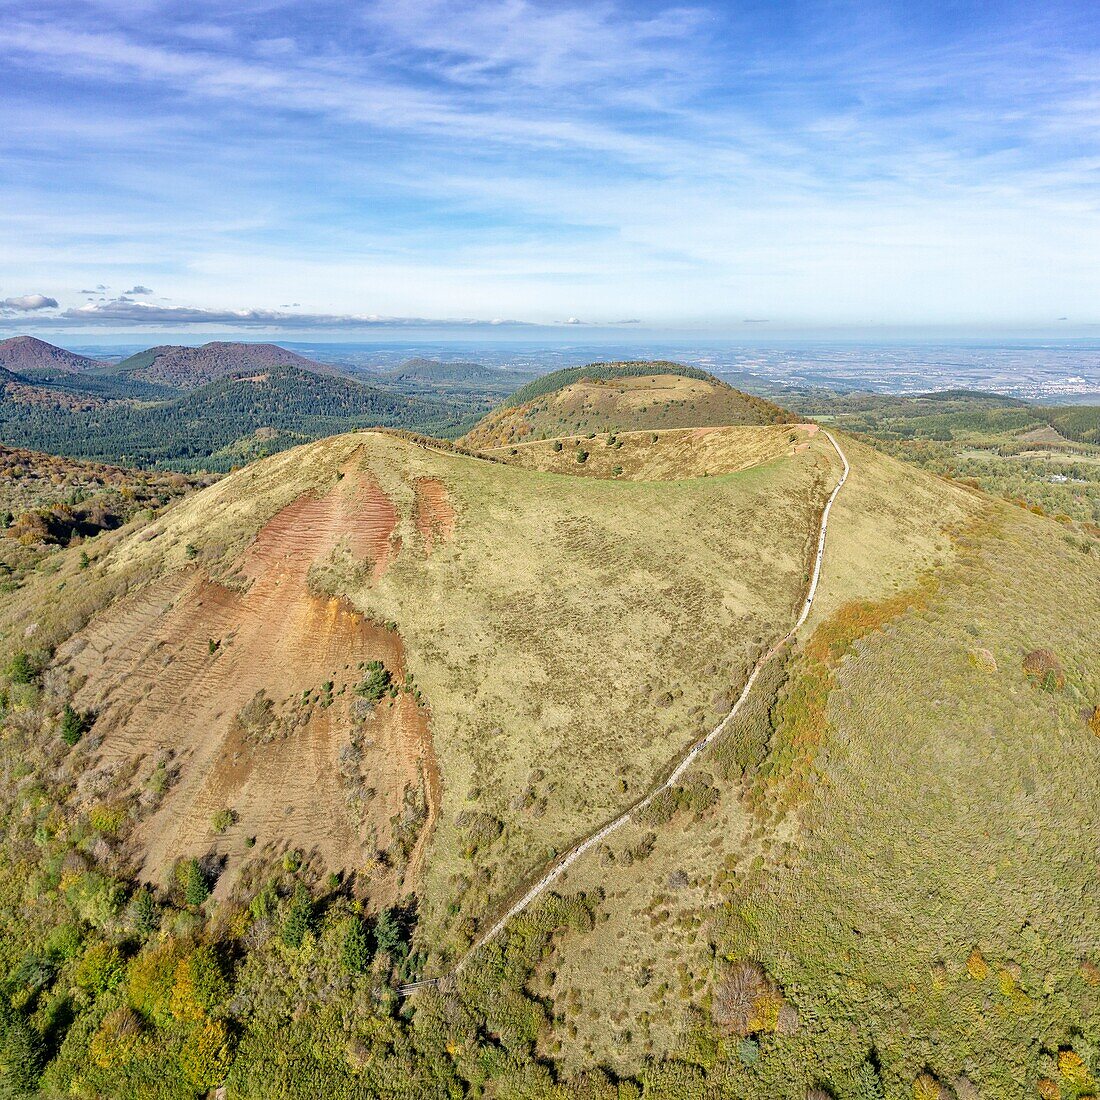 France, Puy de Dome, Orcines, Regional Natural Park of the Auvergne Volcanoes, the Chaîne des Puys, listed as World Heritage by UNESCO, Puy Pariou volcano in the foreground (aerial view)\n